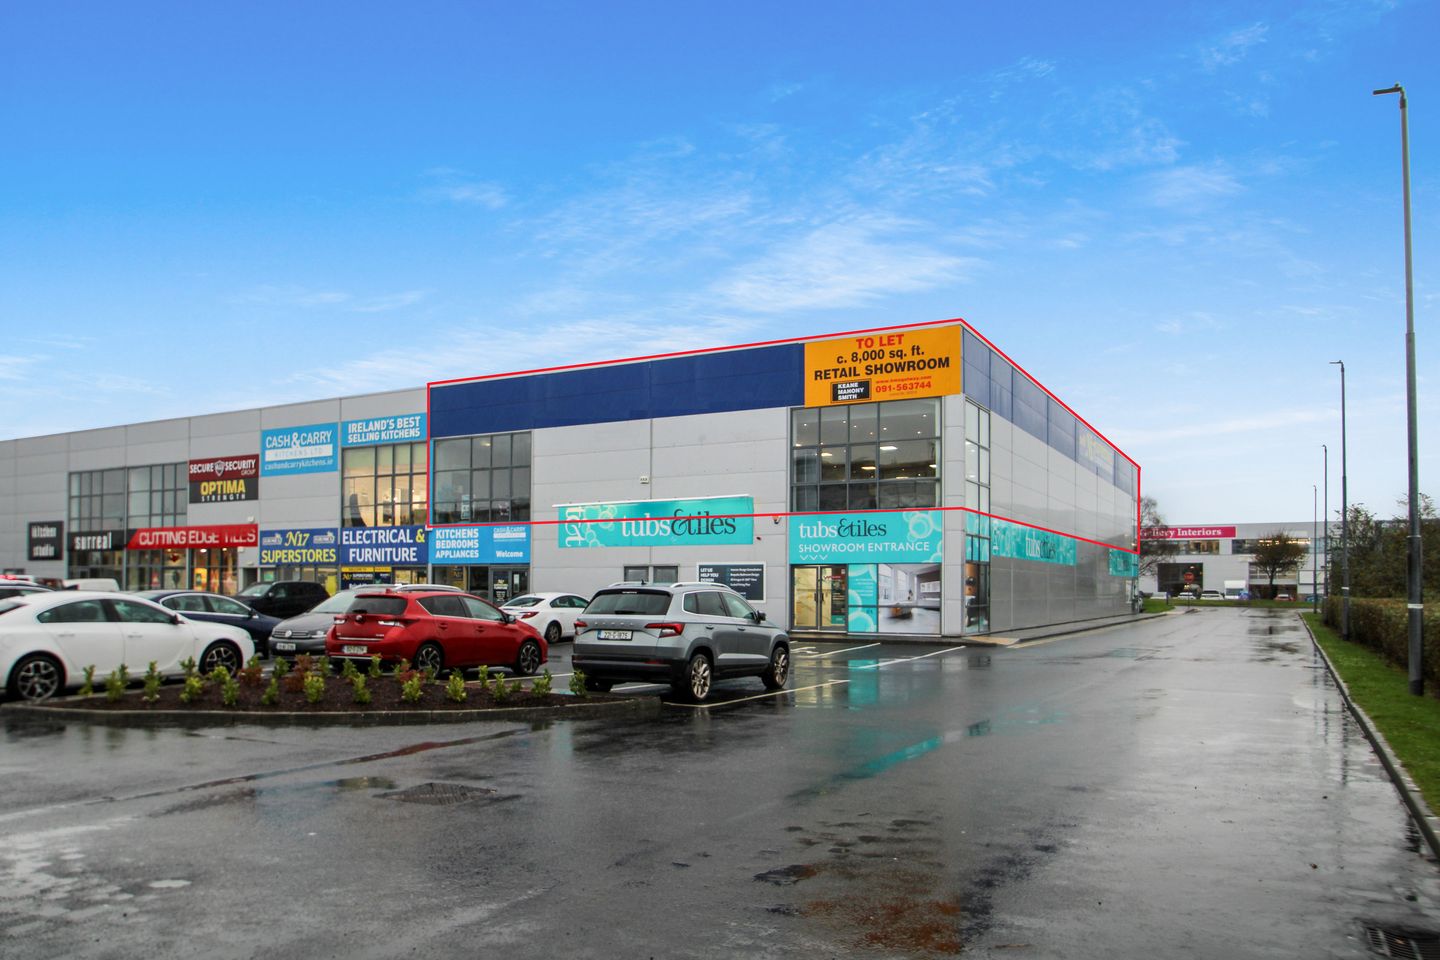 First Floor Retail Warehouse of 7,911sq.ft, Briarhill Business Park, Ballybrit, Co. Galway